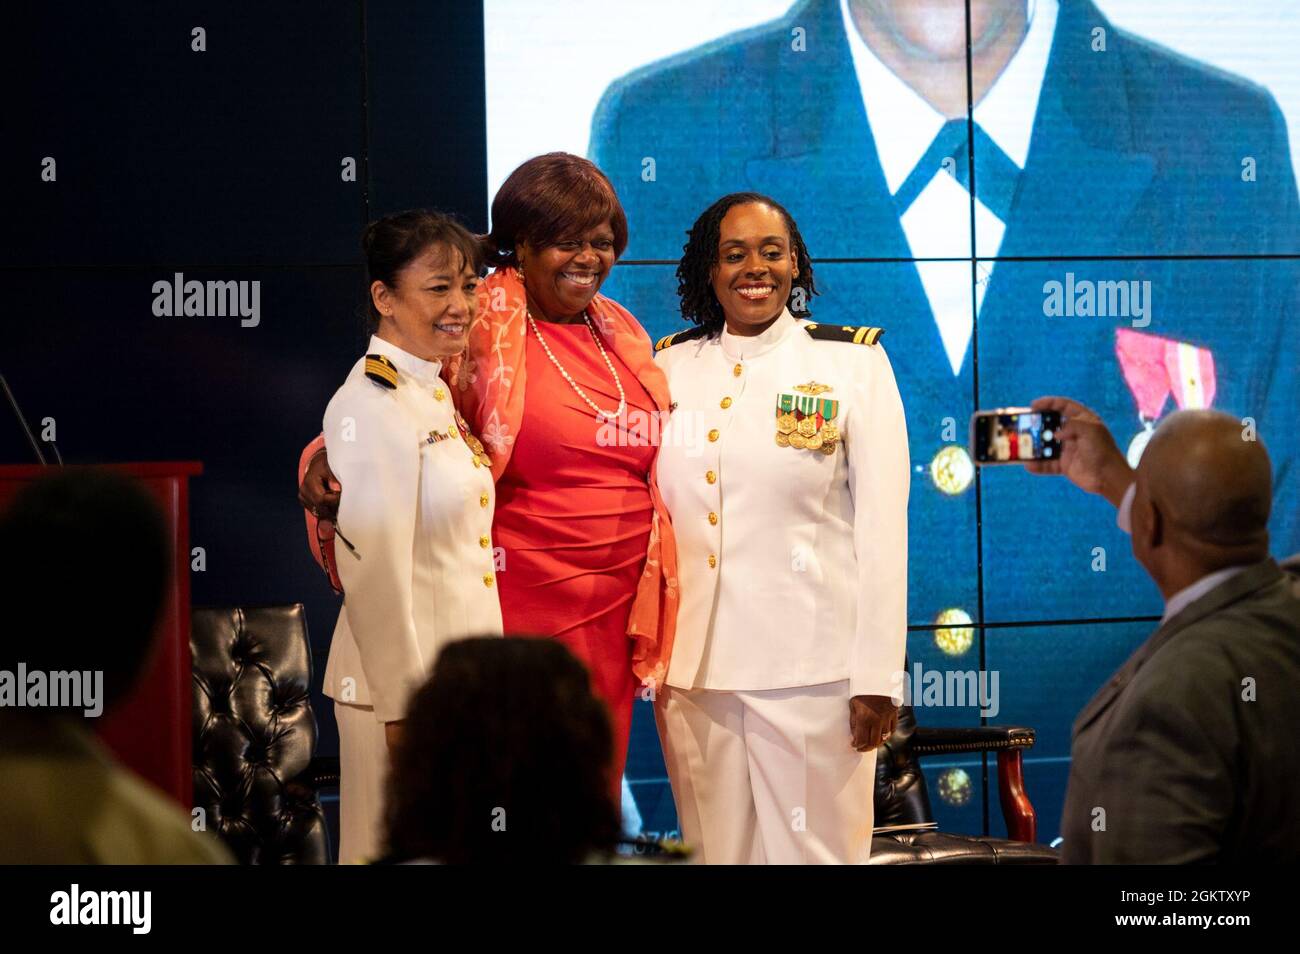 WASHINGTON, DC (July 1, 2021) – Lt. Takana Jefferson (right), Naval Support Activity Washington chaplain, poses with colleagues and friends prior to her promotion ceremony, held onboard Washington Navy Yard. Stock Photo